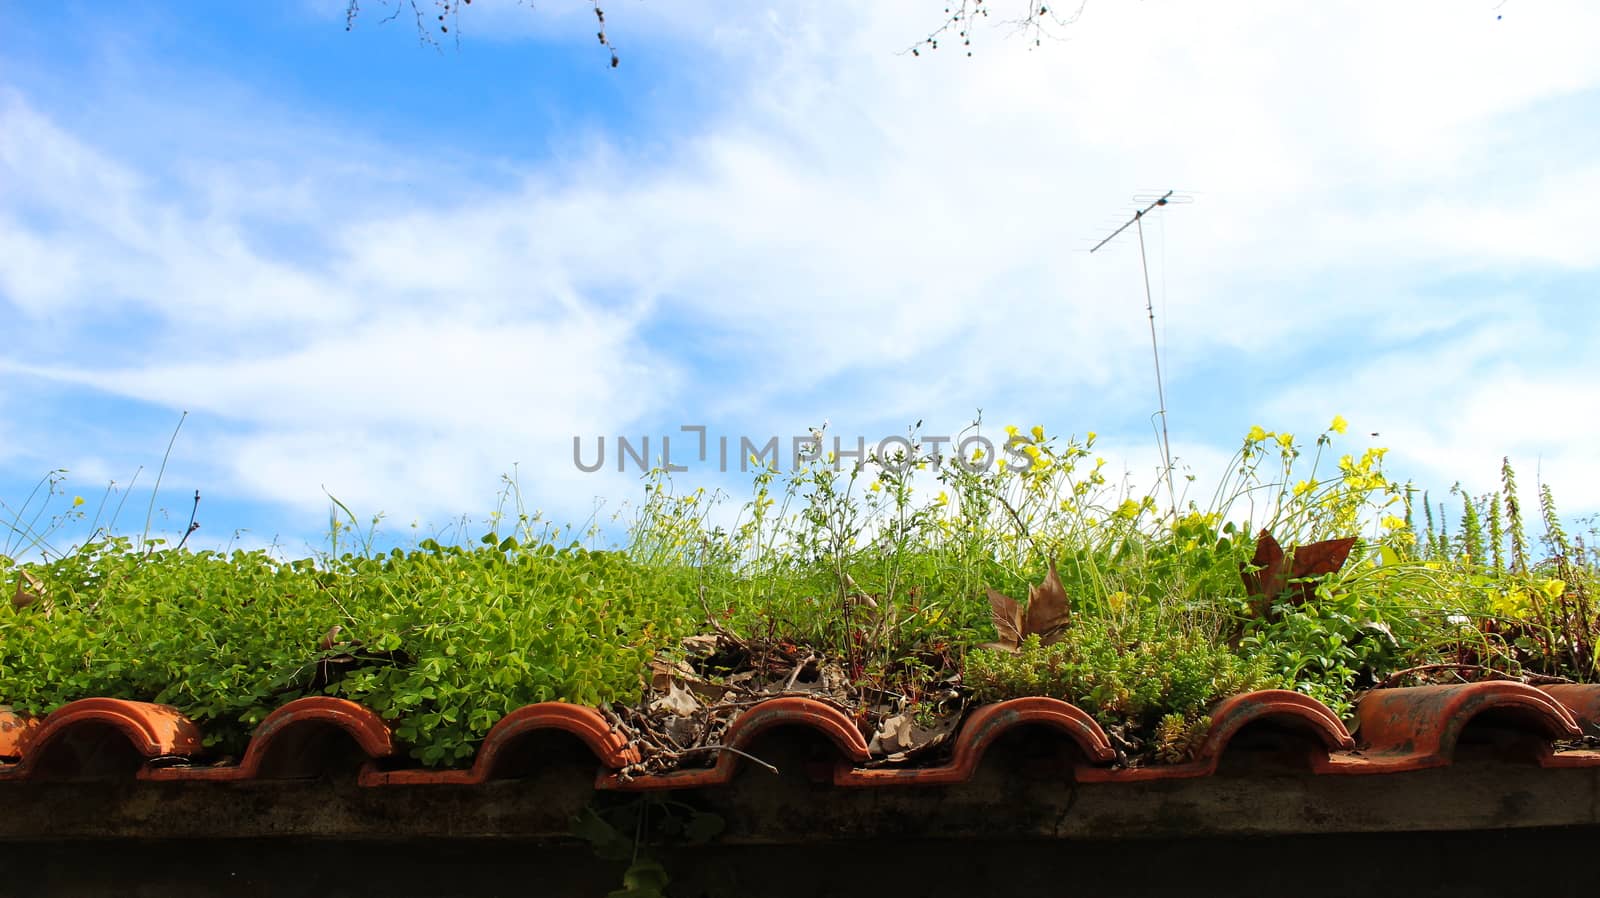 Plants growing on the roof of an old abandoned building, in the background the sky with cloudy white clouds. by mahirrov